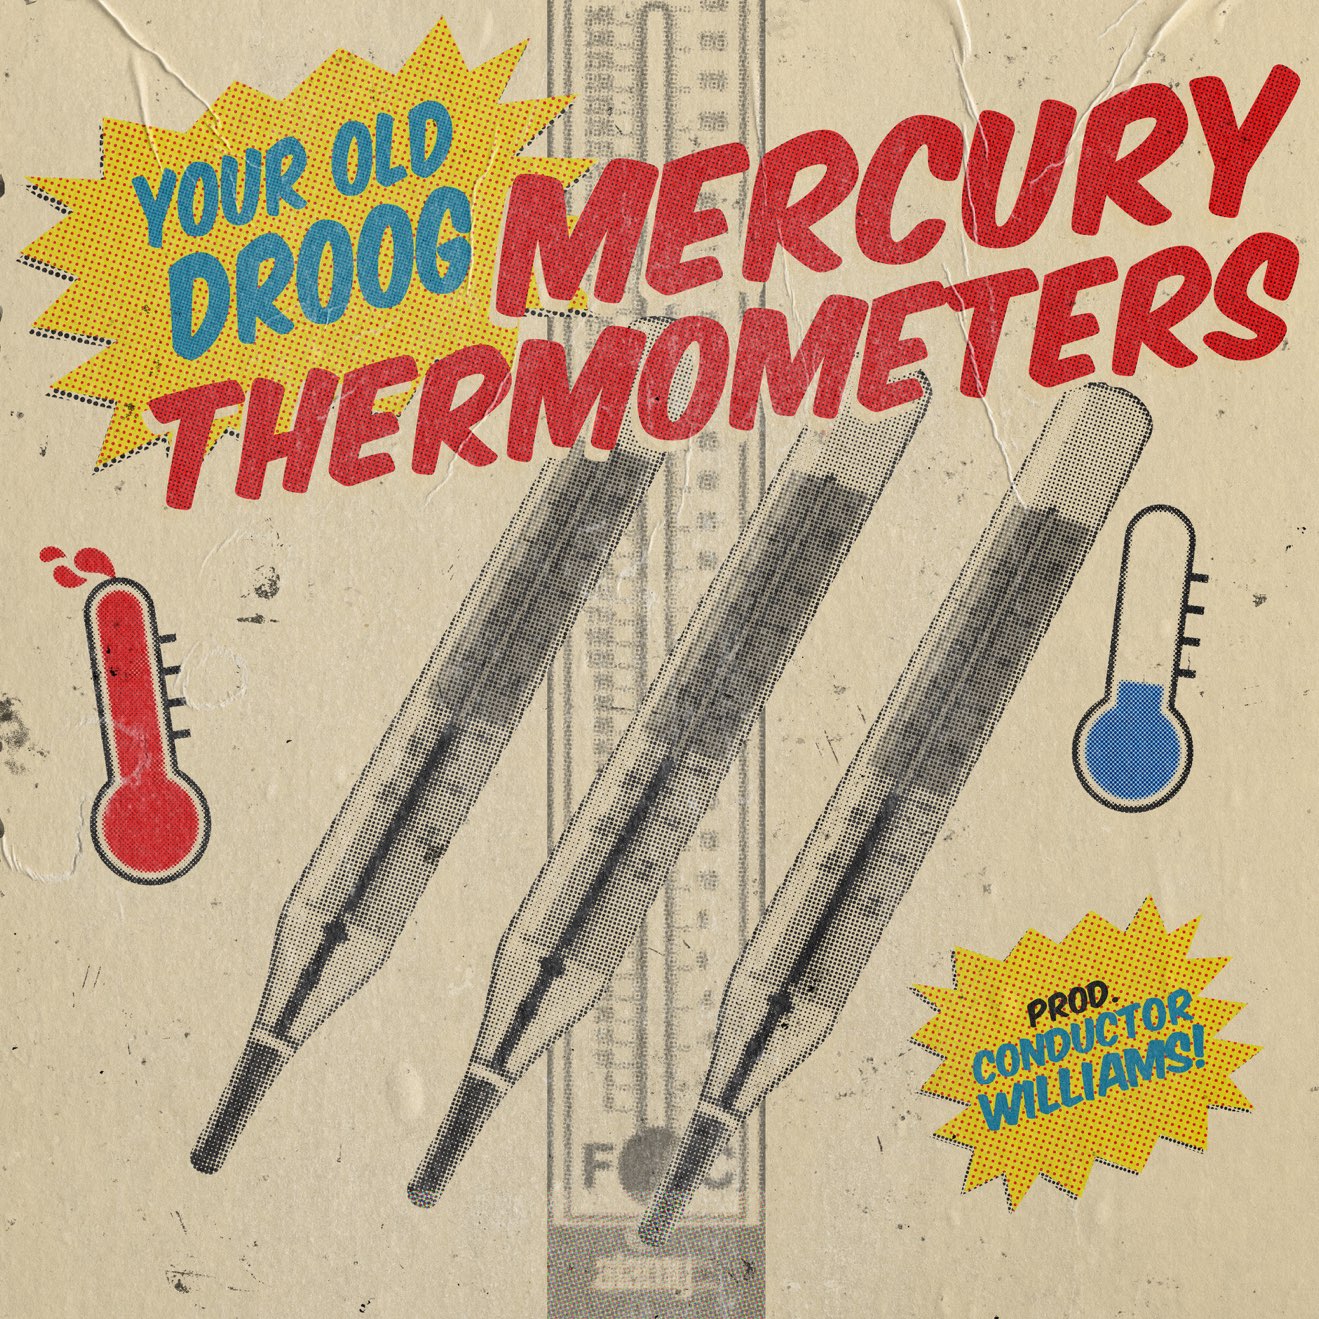 Your Old Droog & Conductor Williams – Mercury Thermometers – Single (2024) [iTunes Match M4A]